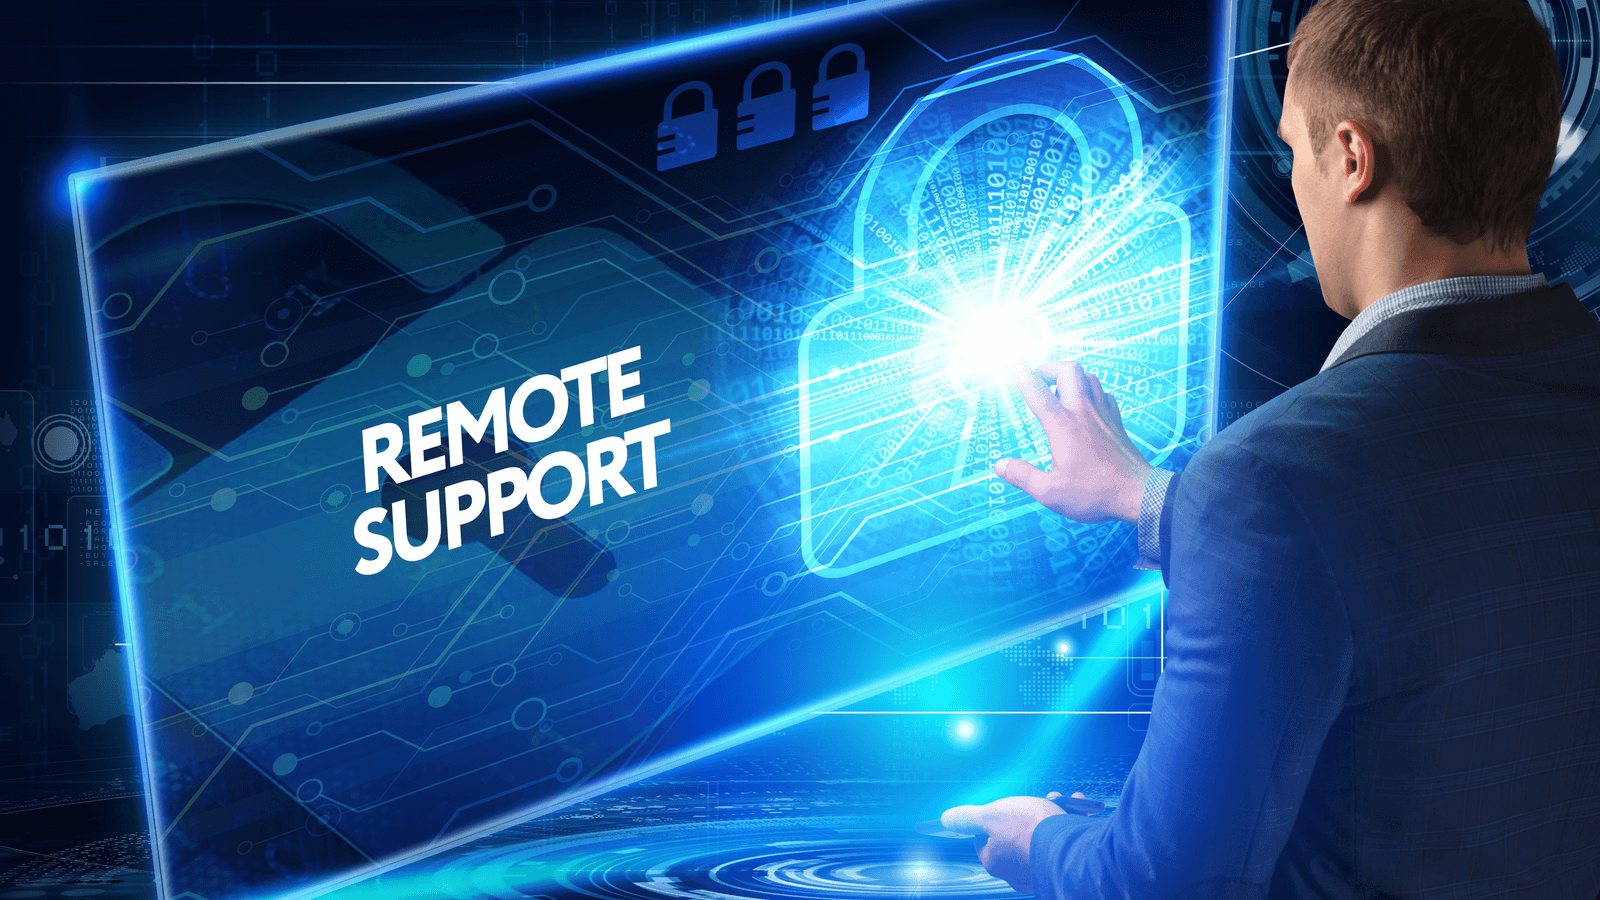 Remote support